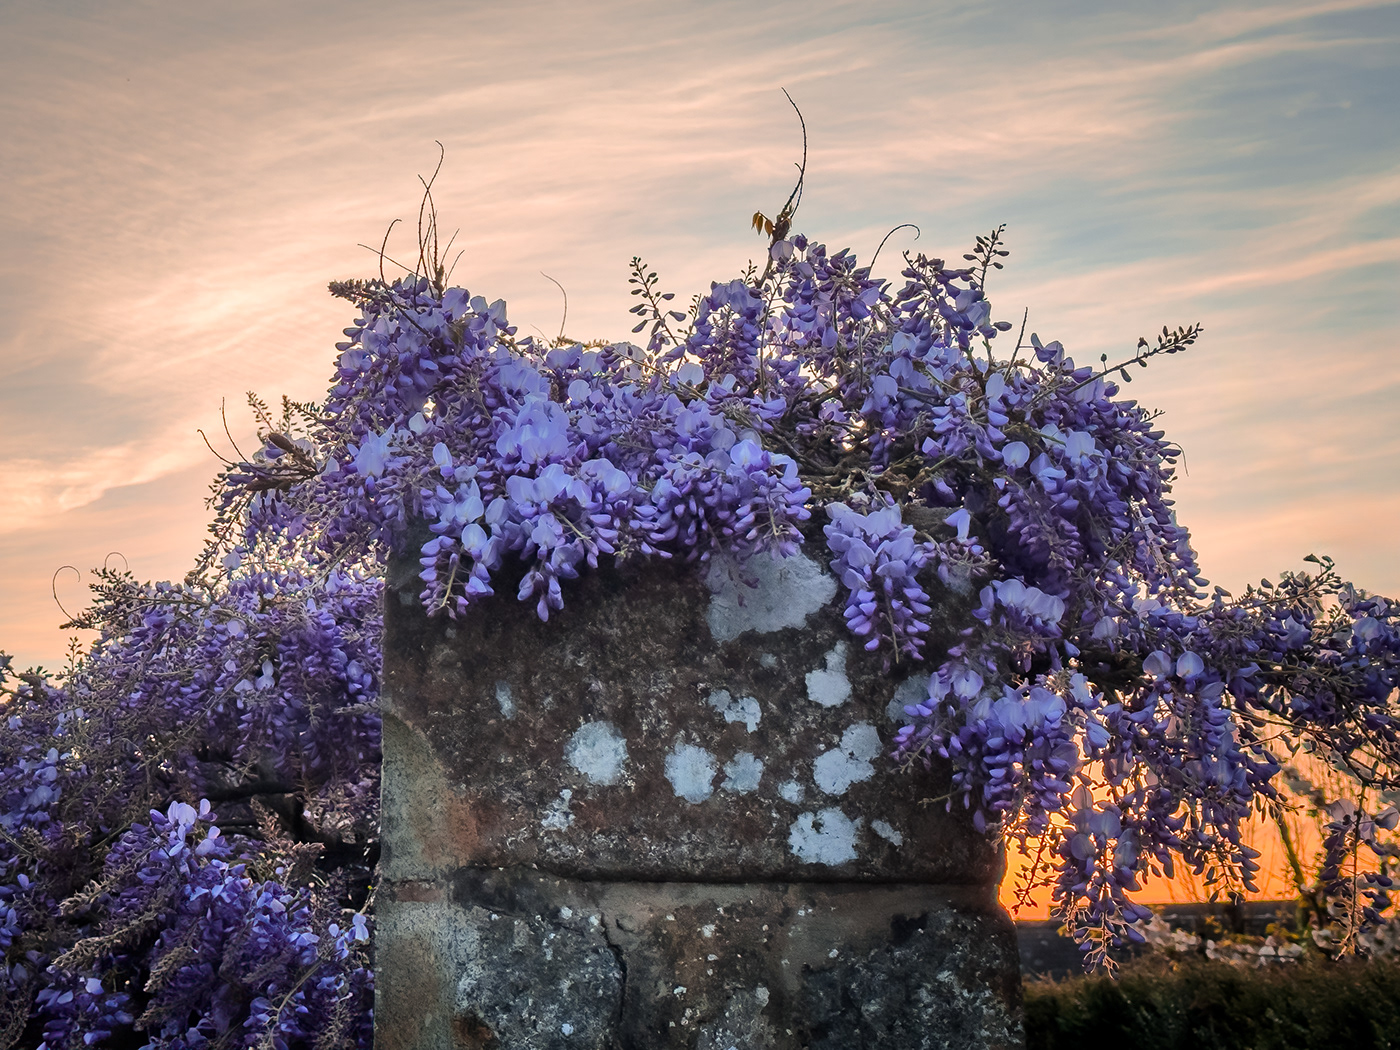 Sunrise Flowers floral spring wisteria lilac Magic   Photography  lightroom Nature